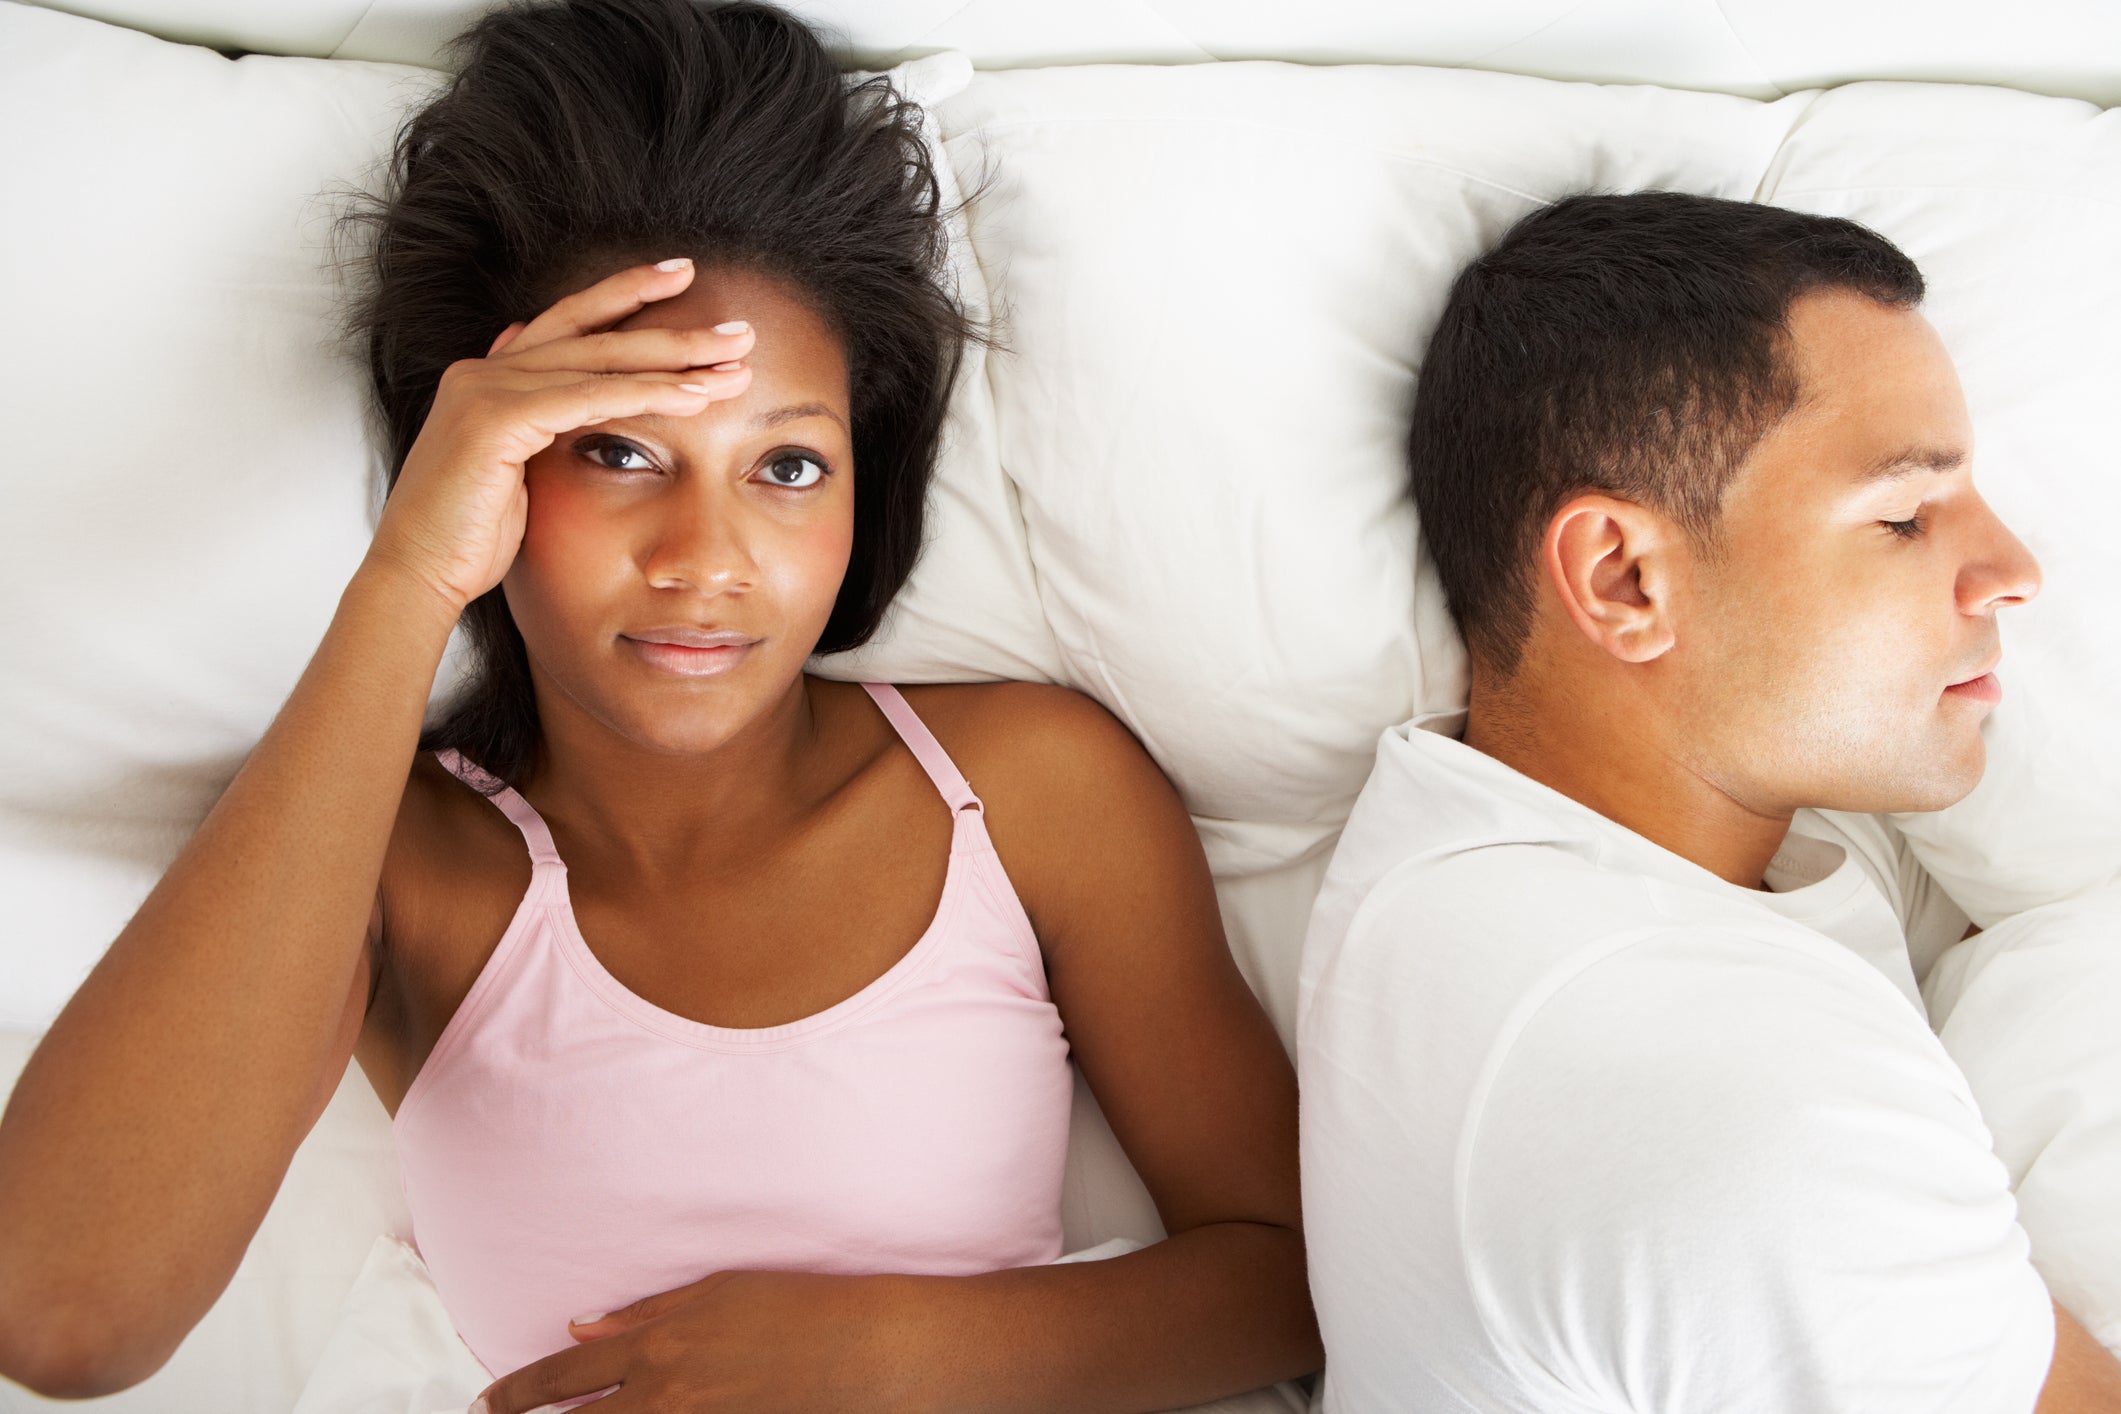 Black Sex Therapists Dispel 5 Messy Myths About Sexual Compatibility